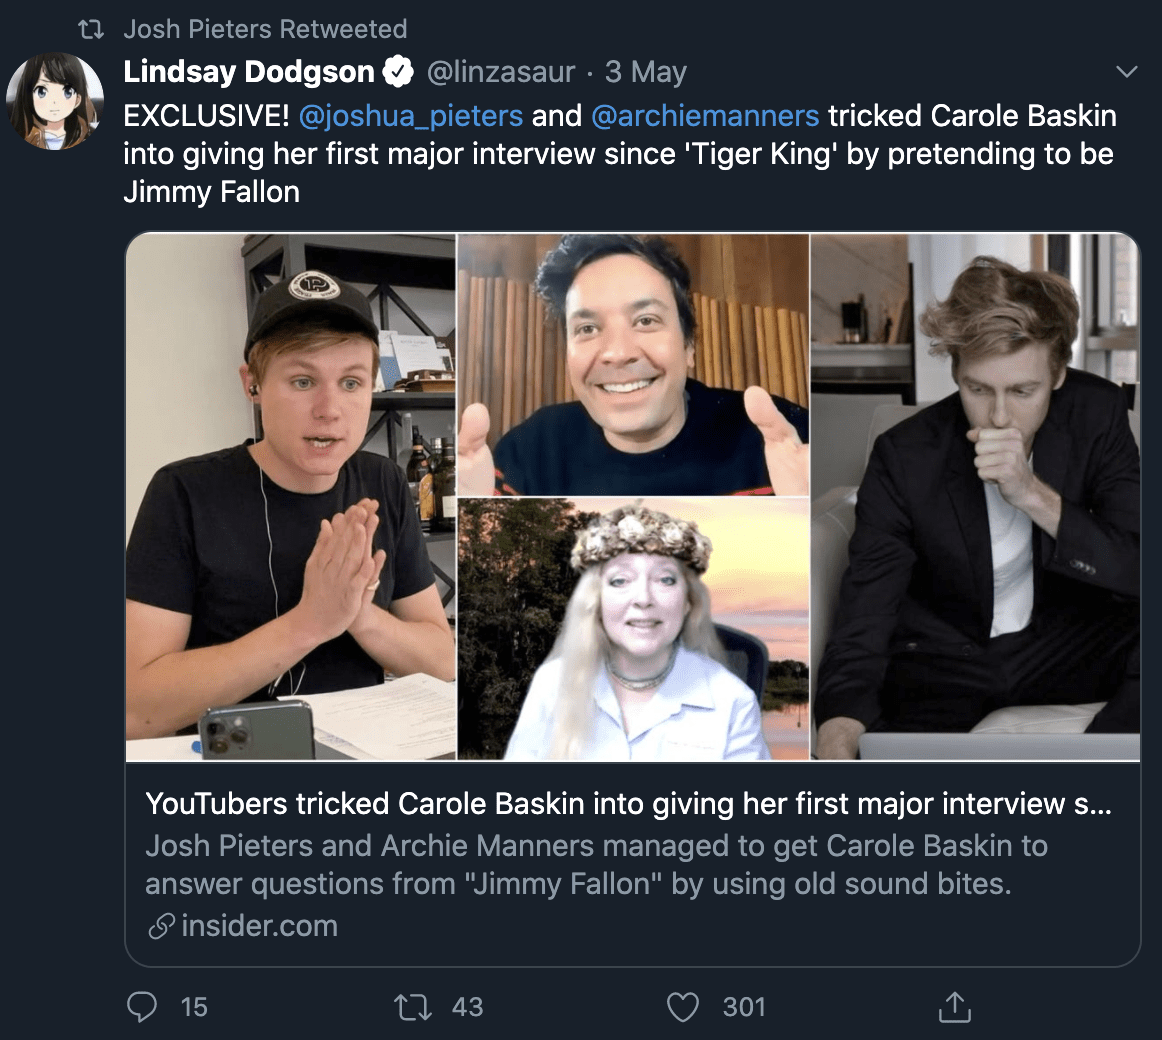 Lindsay's exclusive news about YouTube pranksters interviewing Carole Baskin